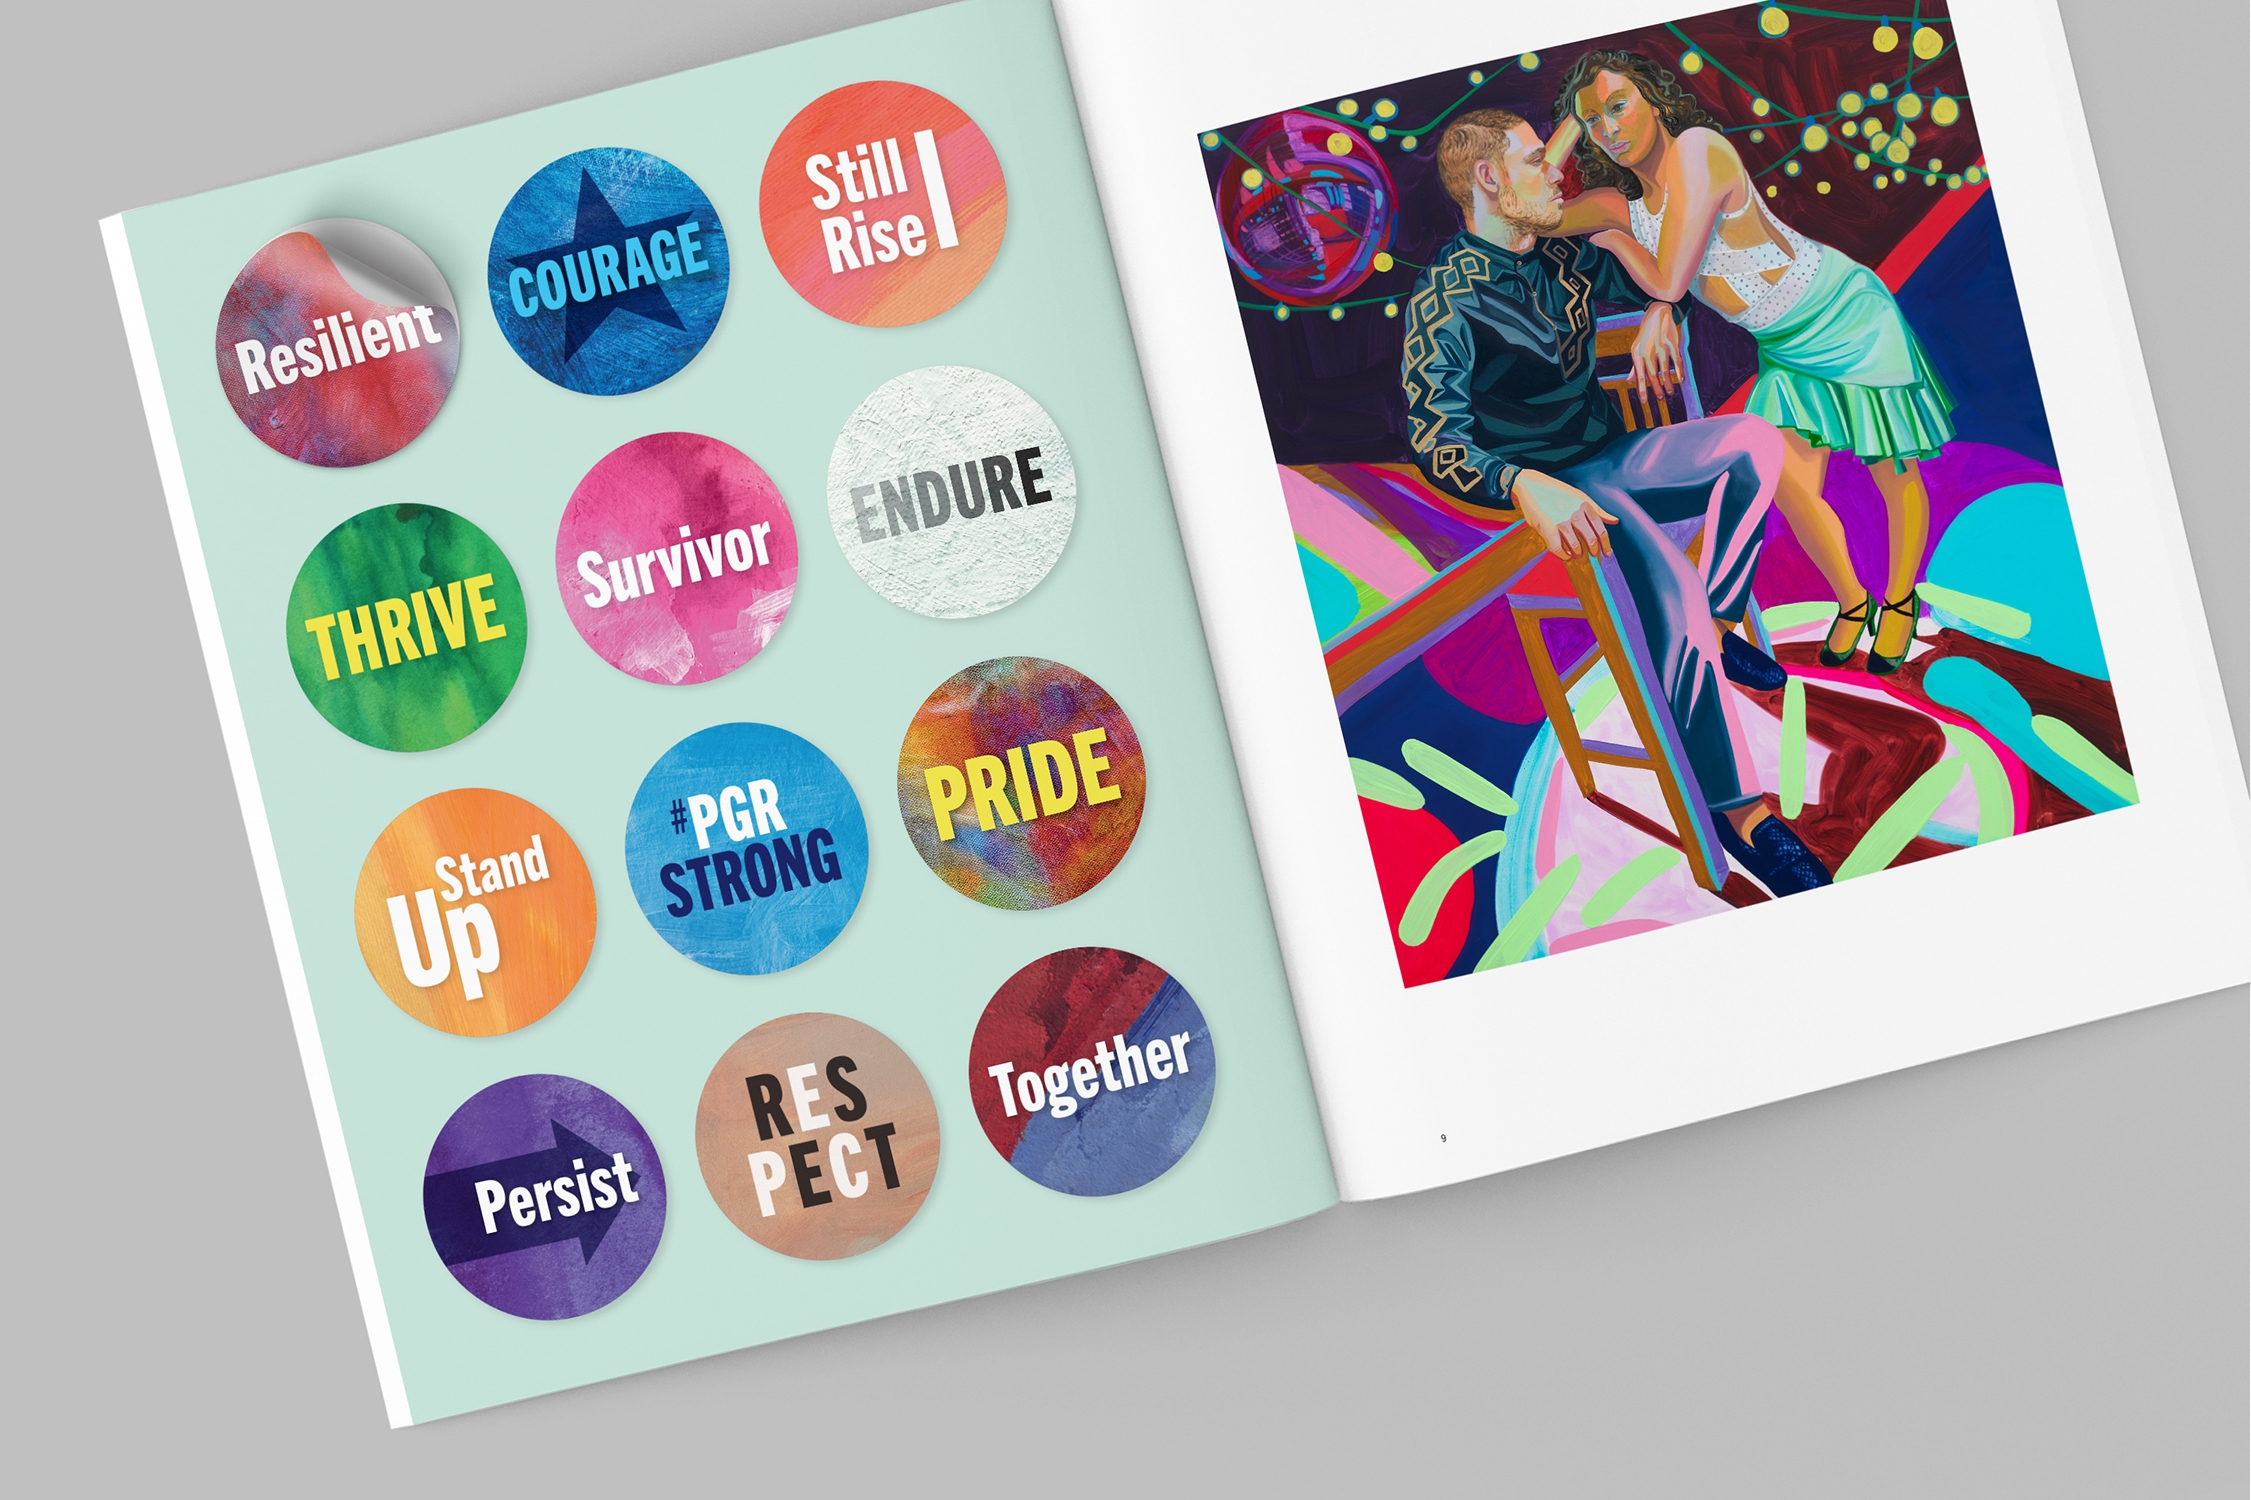 An open spread from The Progressive Corporation Annual Report 2020 showing a sticker sheet on the left hand page, and a painting of two dancers by Aliza Nisenbaum on the right.